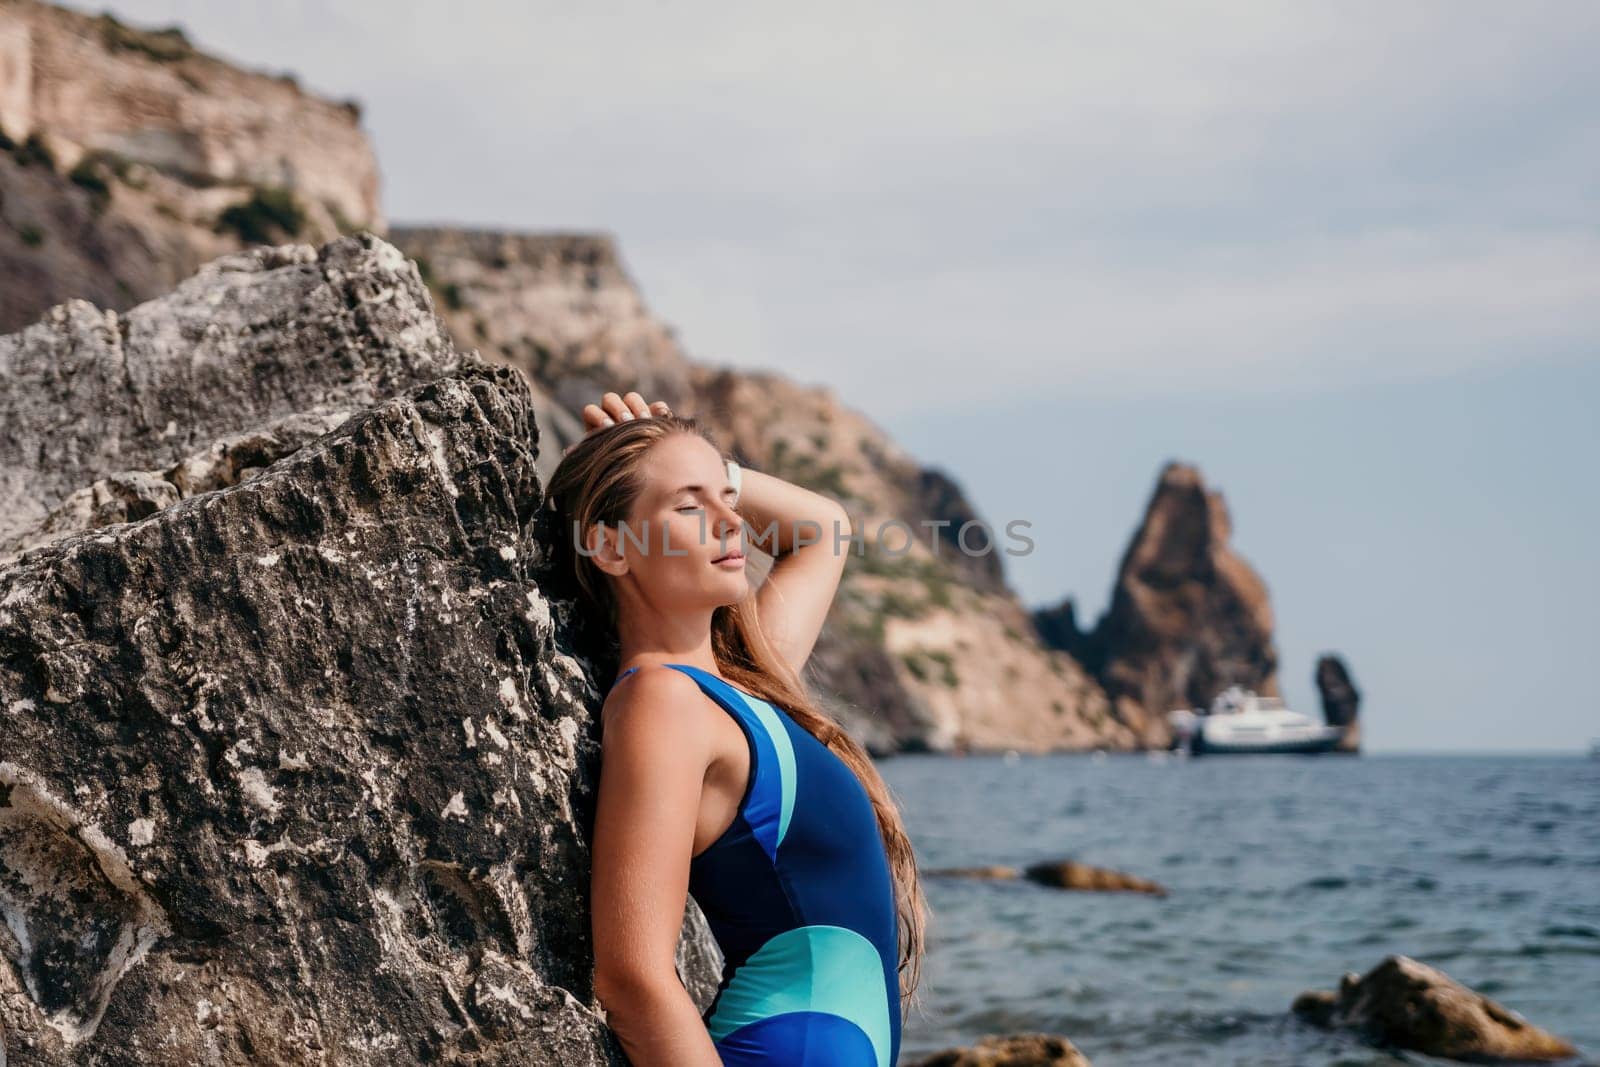 happy tourist in blue swimwear takes a photo outdoors to capture memories. The photo depicts a woman traveling and enjoying her surroundings on the beach, with volcanic mountains in the background